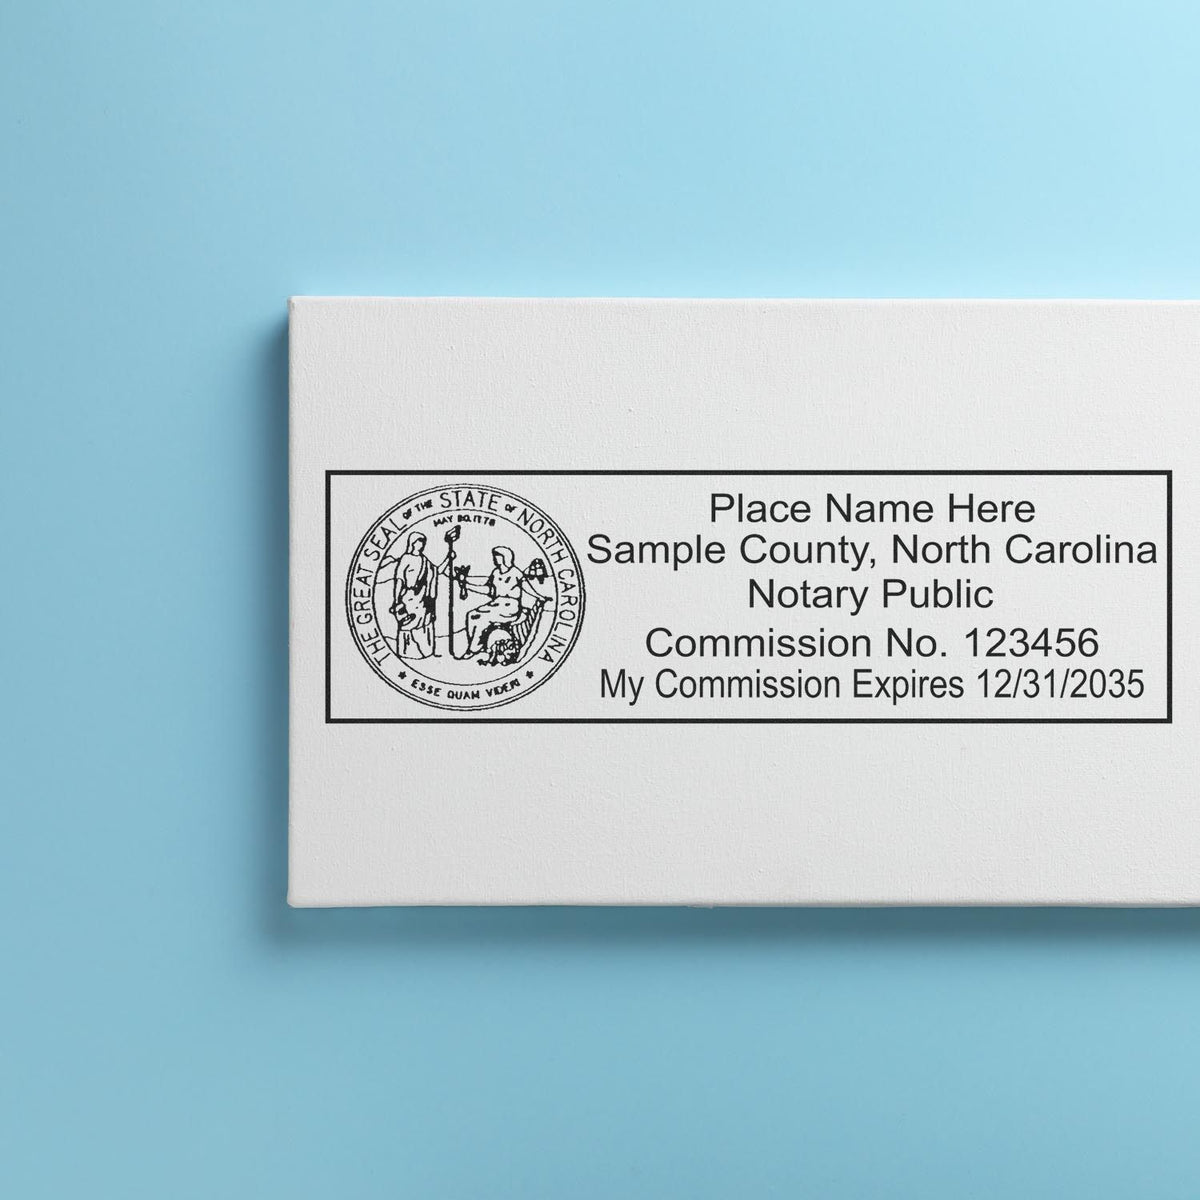 The Super Slim North Carolina Notary Public Stamp stamp impression comes to life with a crisp, detailed photo on paper - showcasing true professional quality.